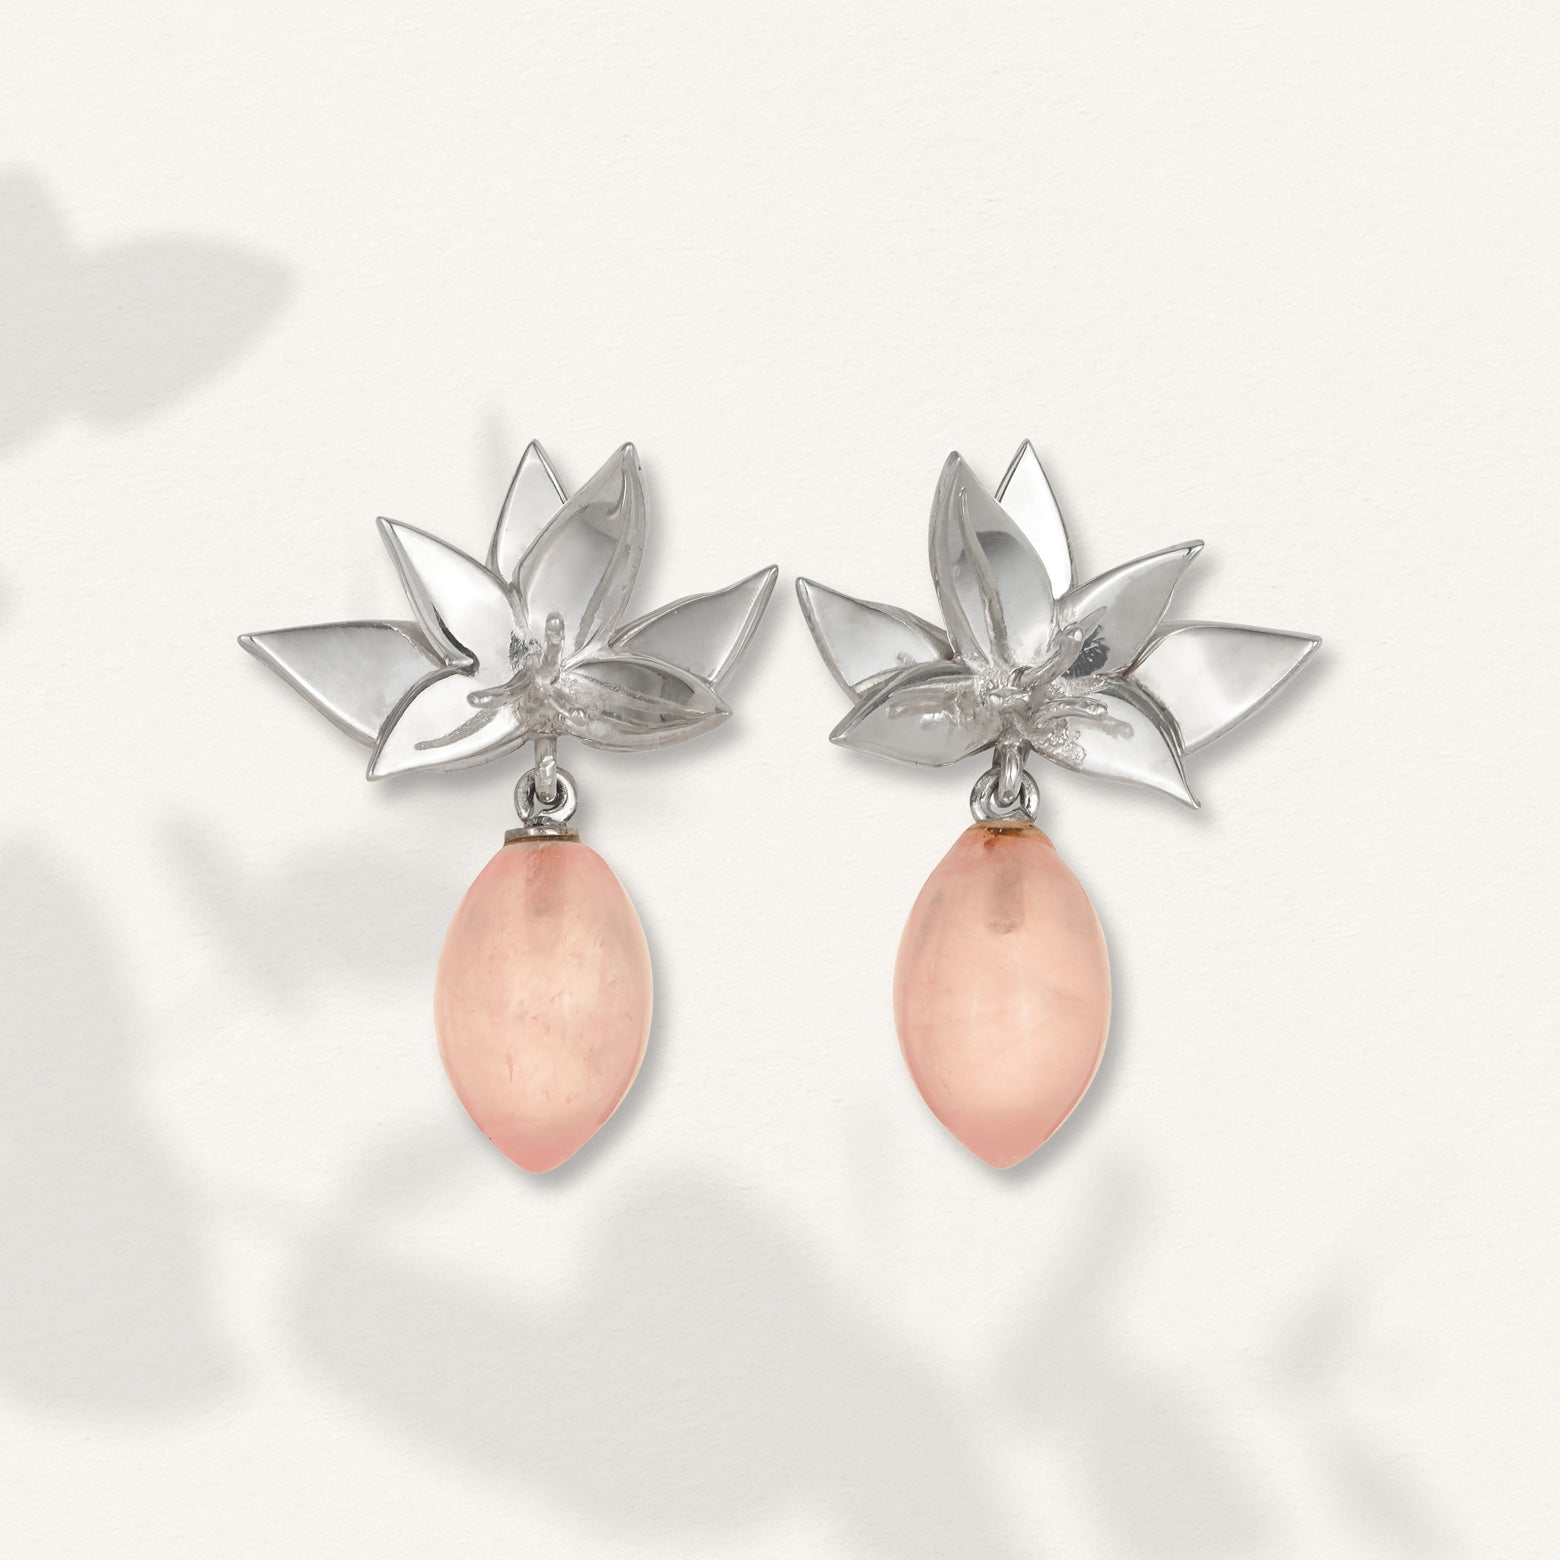 Kelly Woodcroft Brisbane made earrings featuring silver orchids and rose quartz drops. 